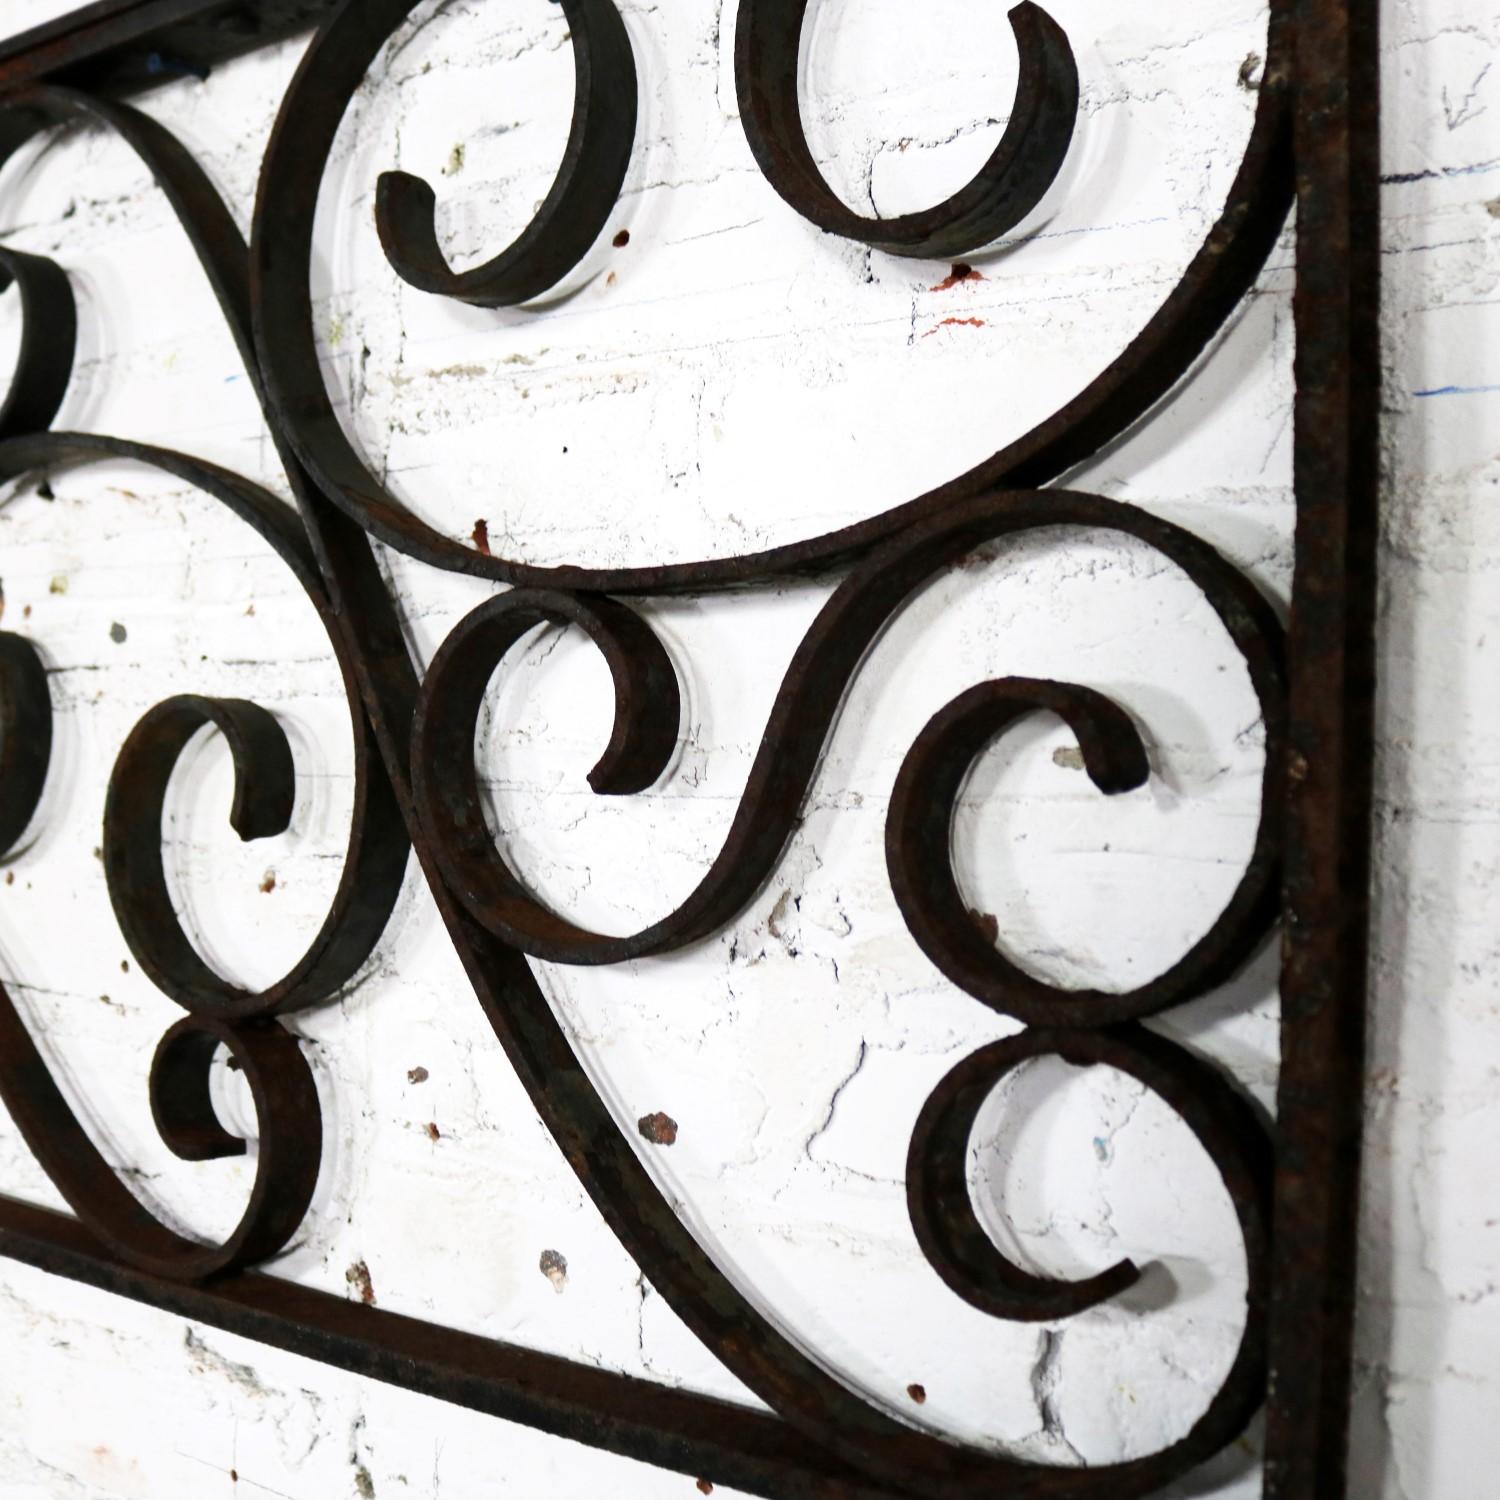 Antique Swirled Design Wrought Iron Railing Piece Trellis or Fence Section For Sale 5